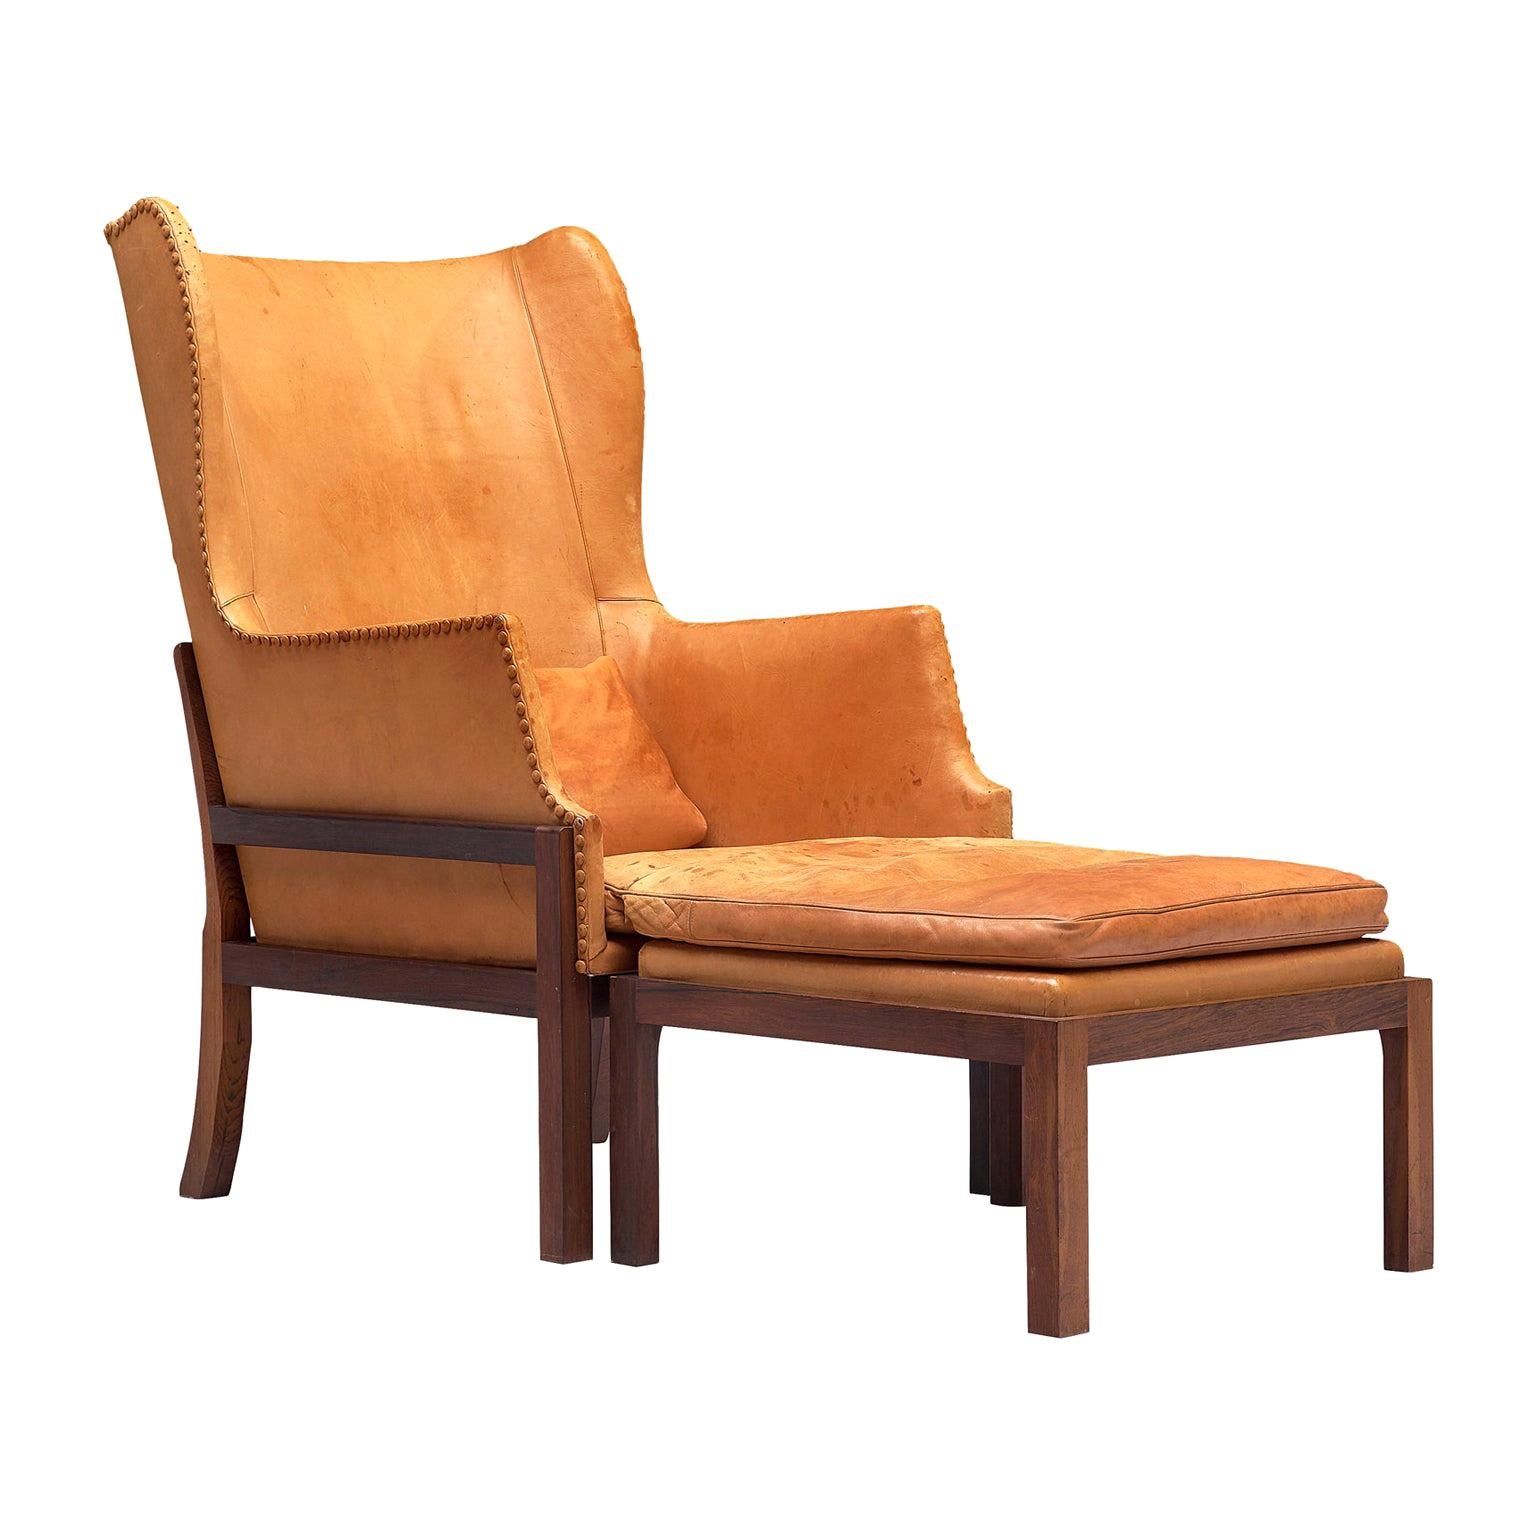 Mogens Koch Wingback Chair and Ottoman in Dark Mahogany, Cognac Leather